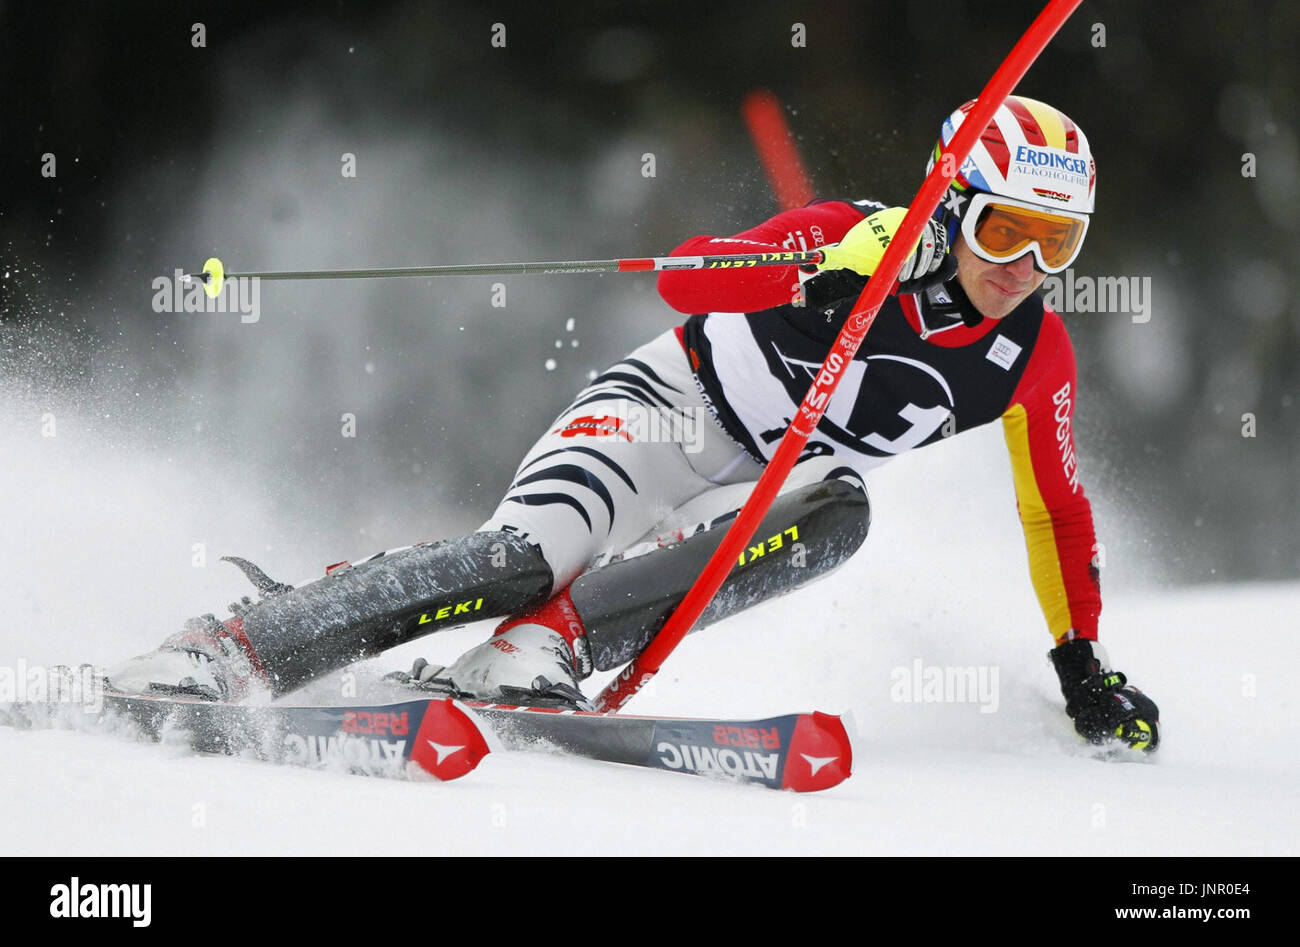 KITZBUEHEL, Austria - Felix Neureuther of Germany clears a gate during the men's slalom at the Alpine Skiing World Cup in Kitzbuehel, Austria, on Jan. 24, 2010. Neureuther finished in a two-run combined time of one minute 37.35 seconds to clinch his first World Cup victory. (Kyodo) Stock Photo